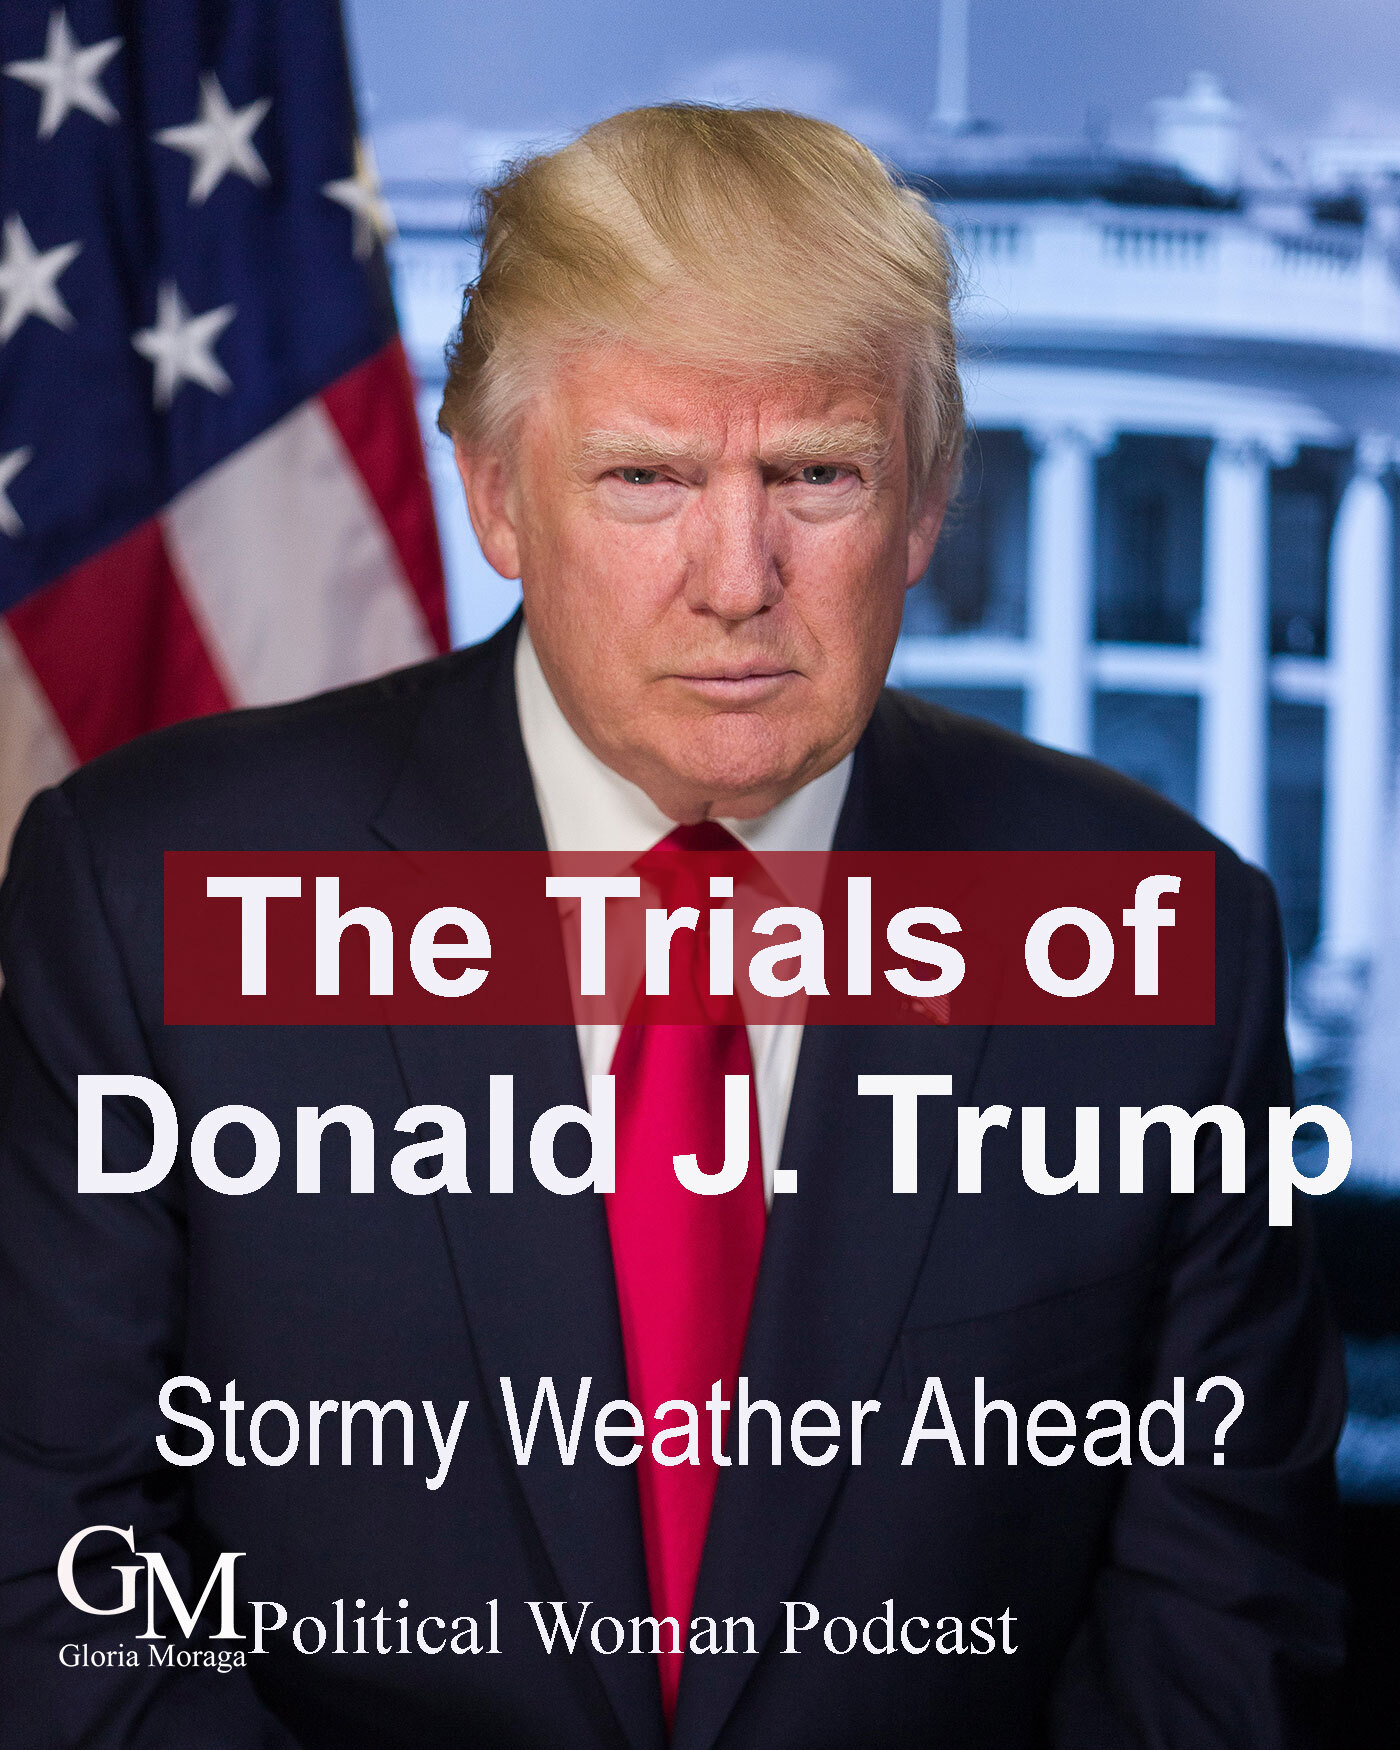 The Trials of Donald J. Trump: Is there Stormy Weather Ahead?